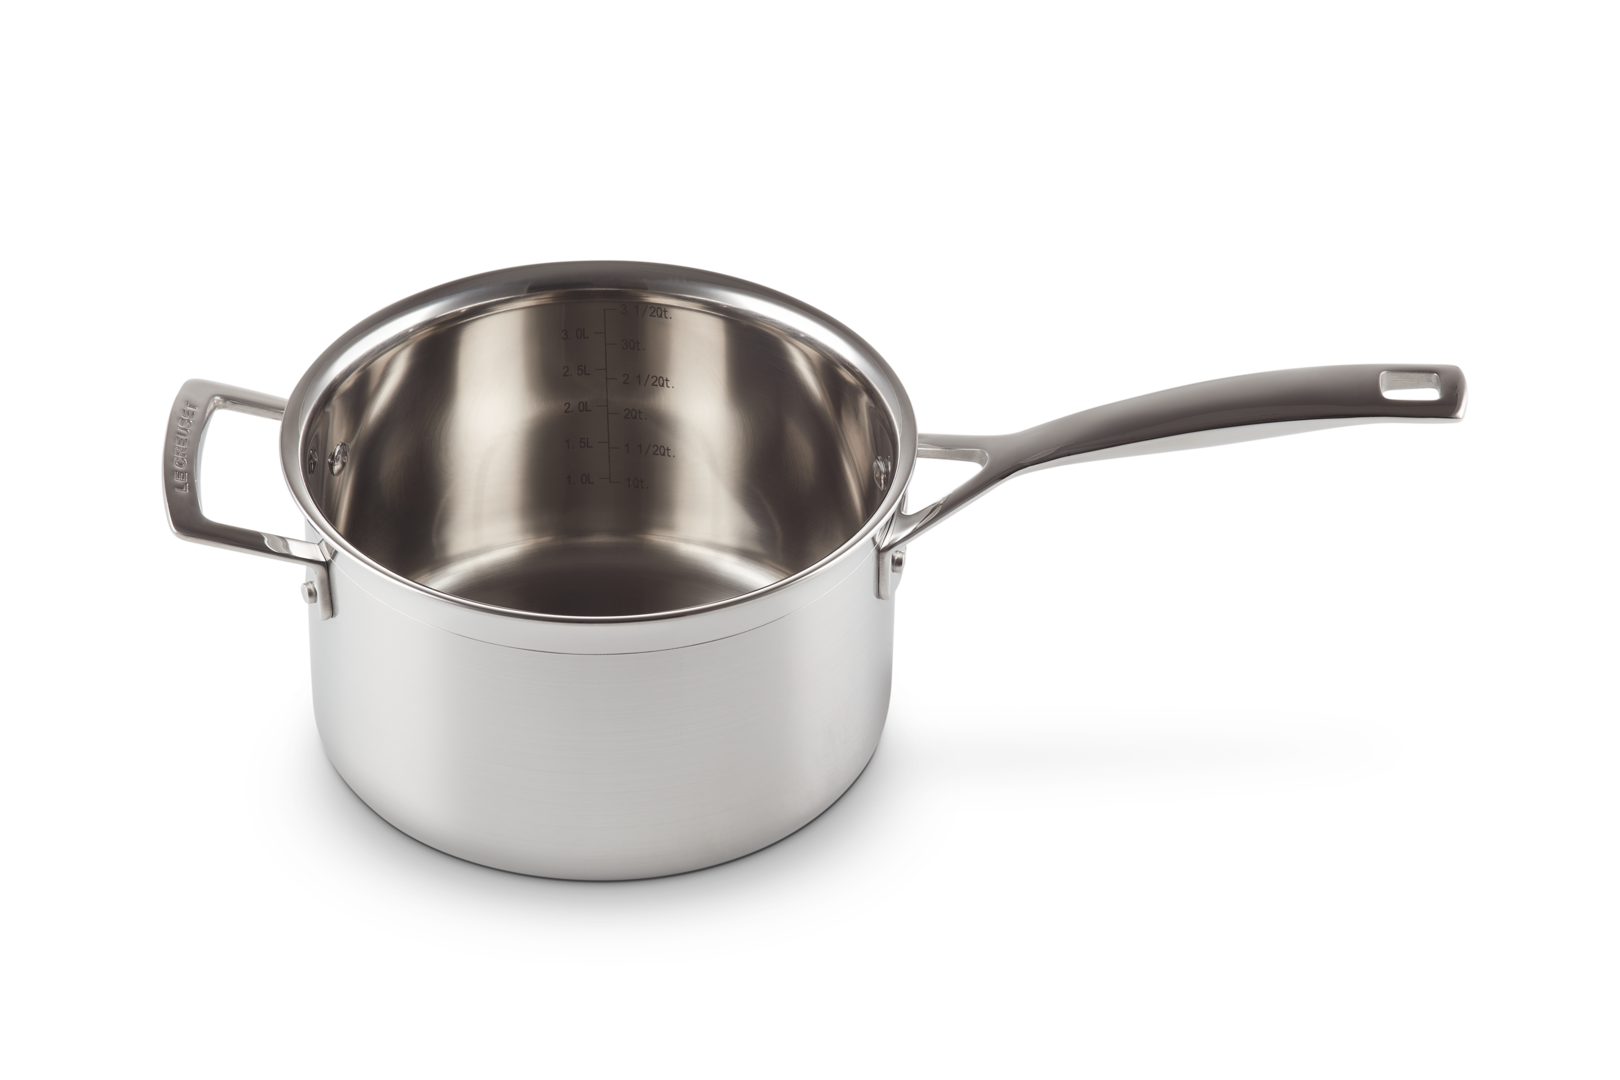 LE CREUSET 3-Ply Stainless-Steel 3-Qrt covered Saucepan with Lid 